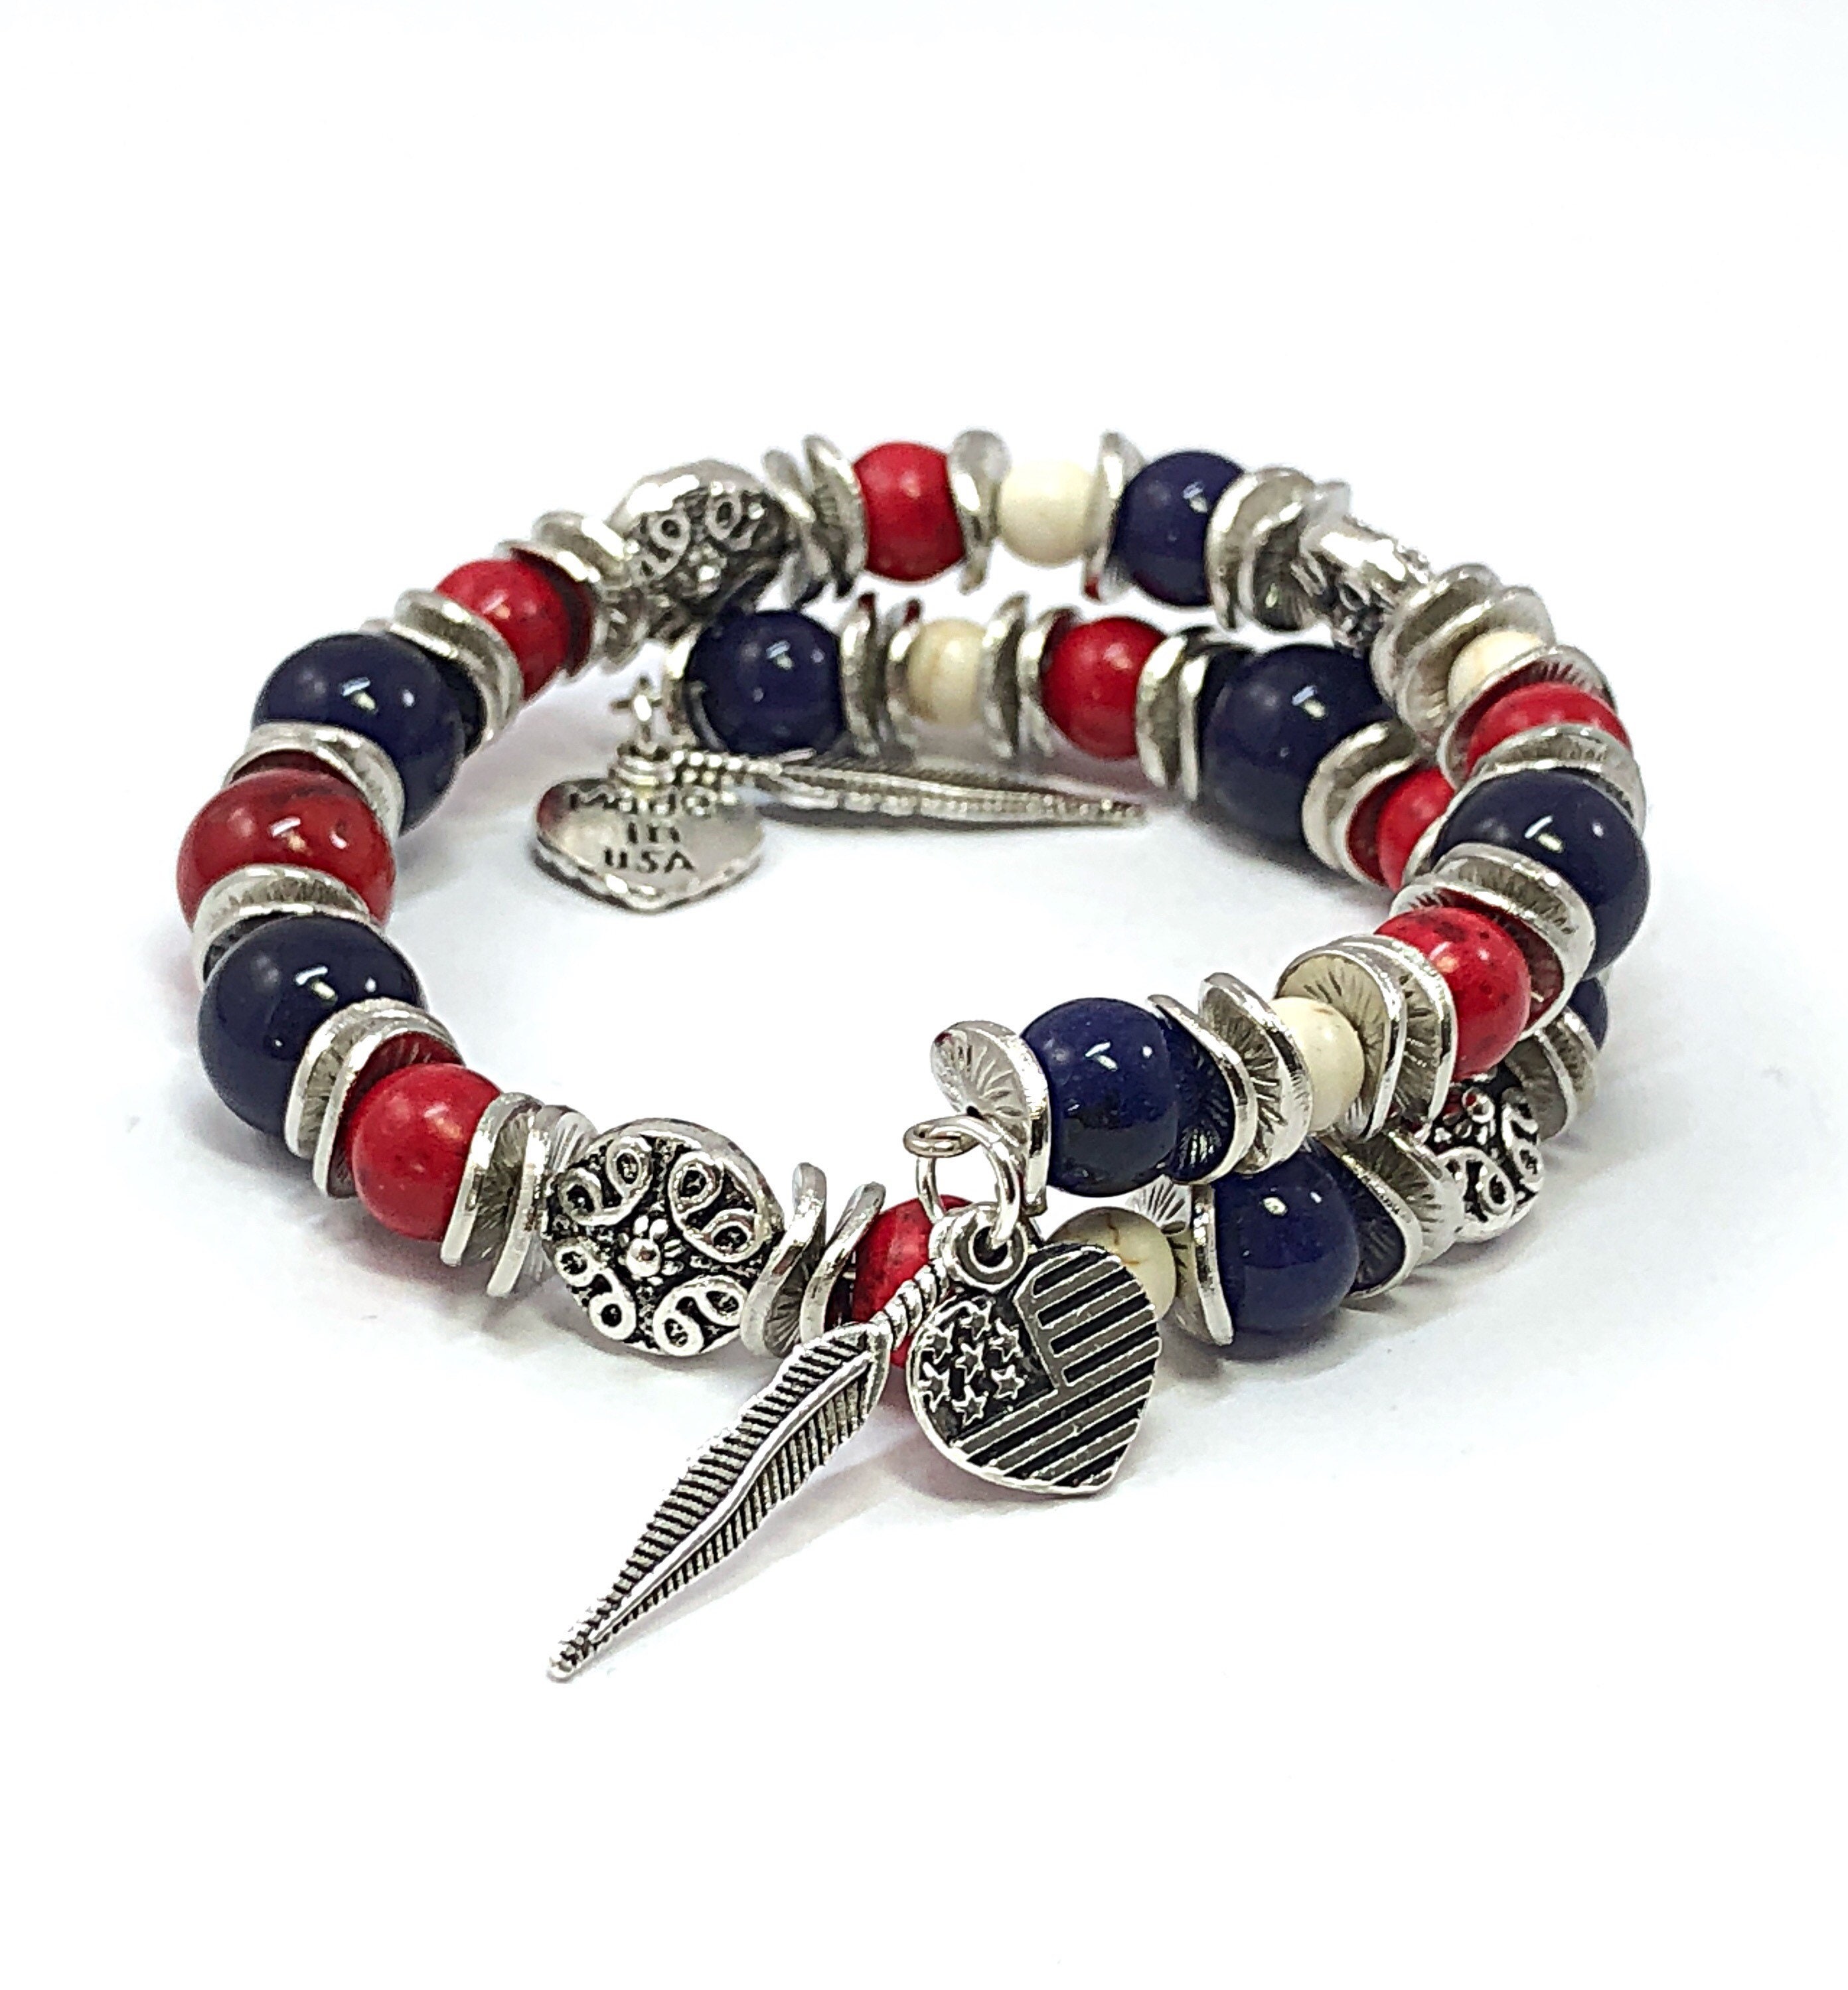 Cuff bracelet American Flag Bracelet Patriotic Jewellery 4th of July Accessories Red White and Blue jewellery Unisex jewellery